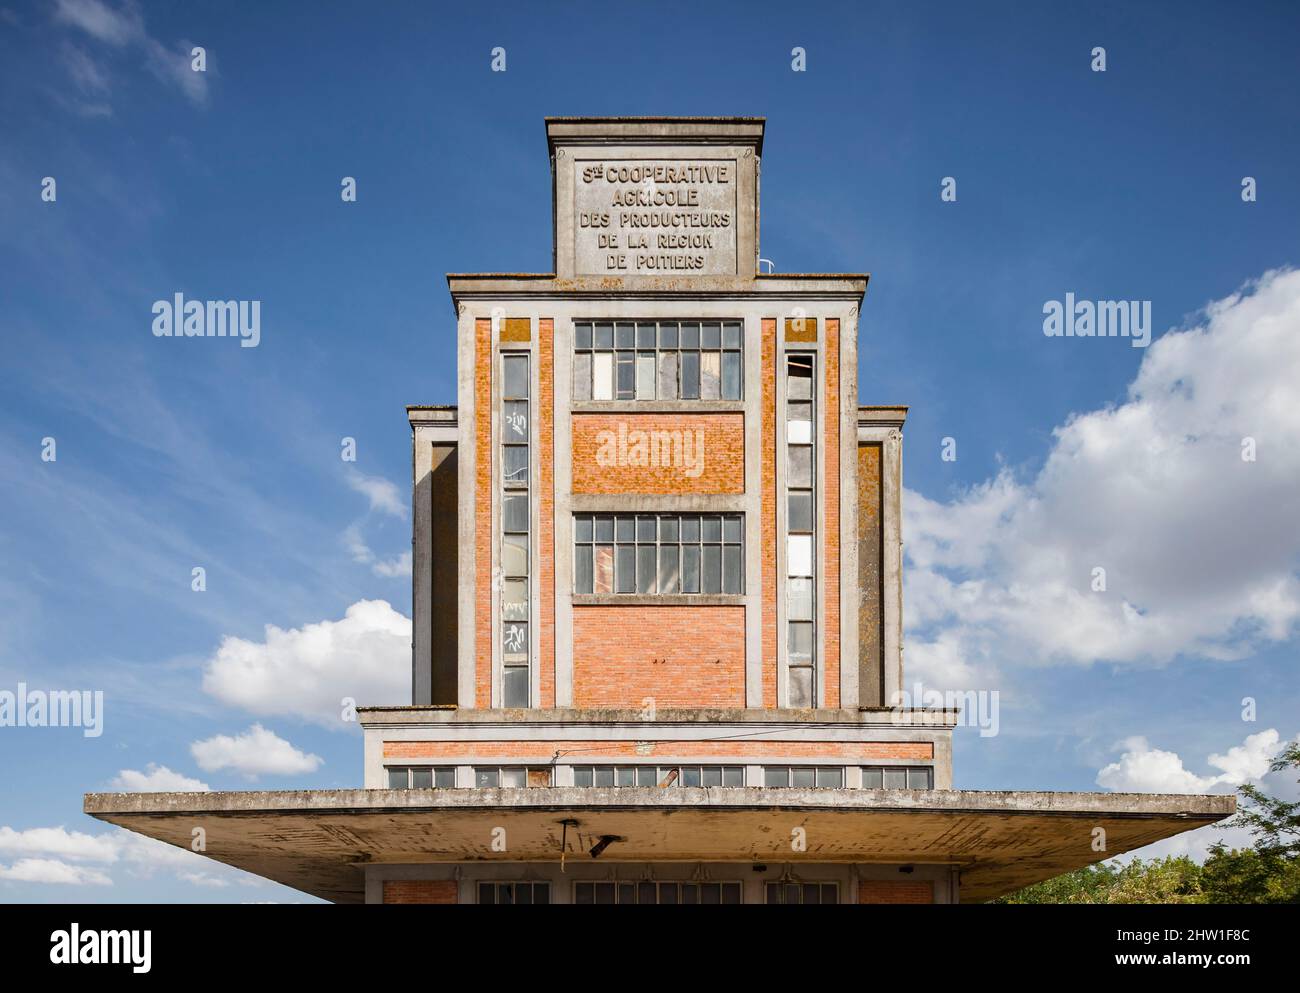 France, Vienne, Grand Poitiers, Saint-Julien-l'Ars, former agricultural silo, commissioned in 1955 Stock Photo